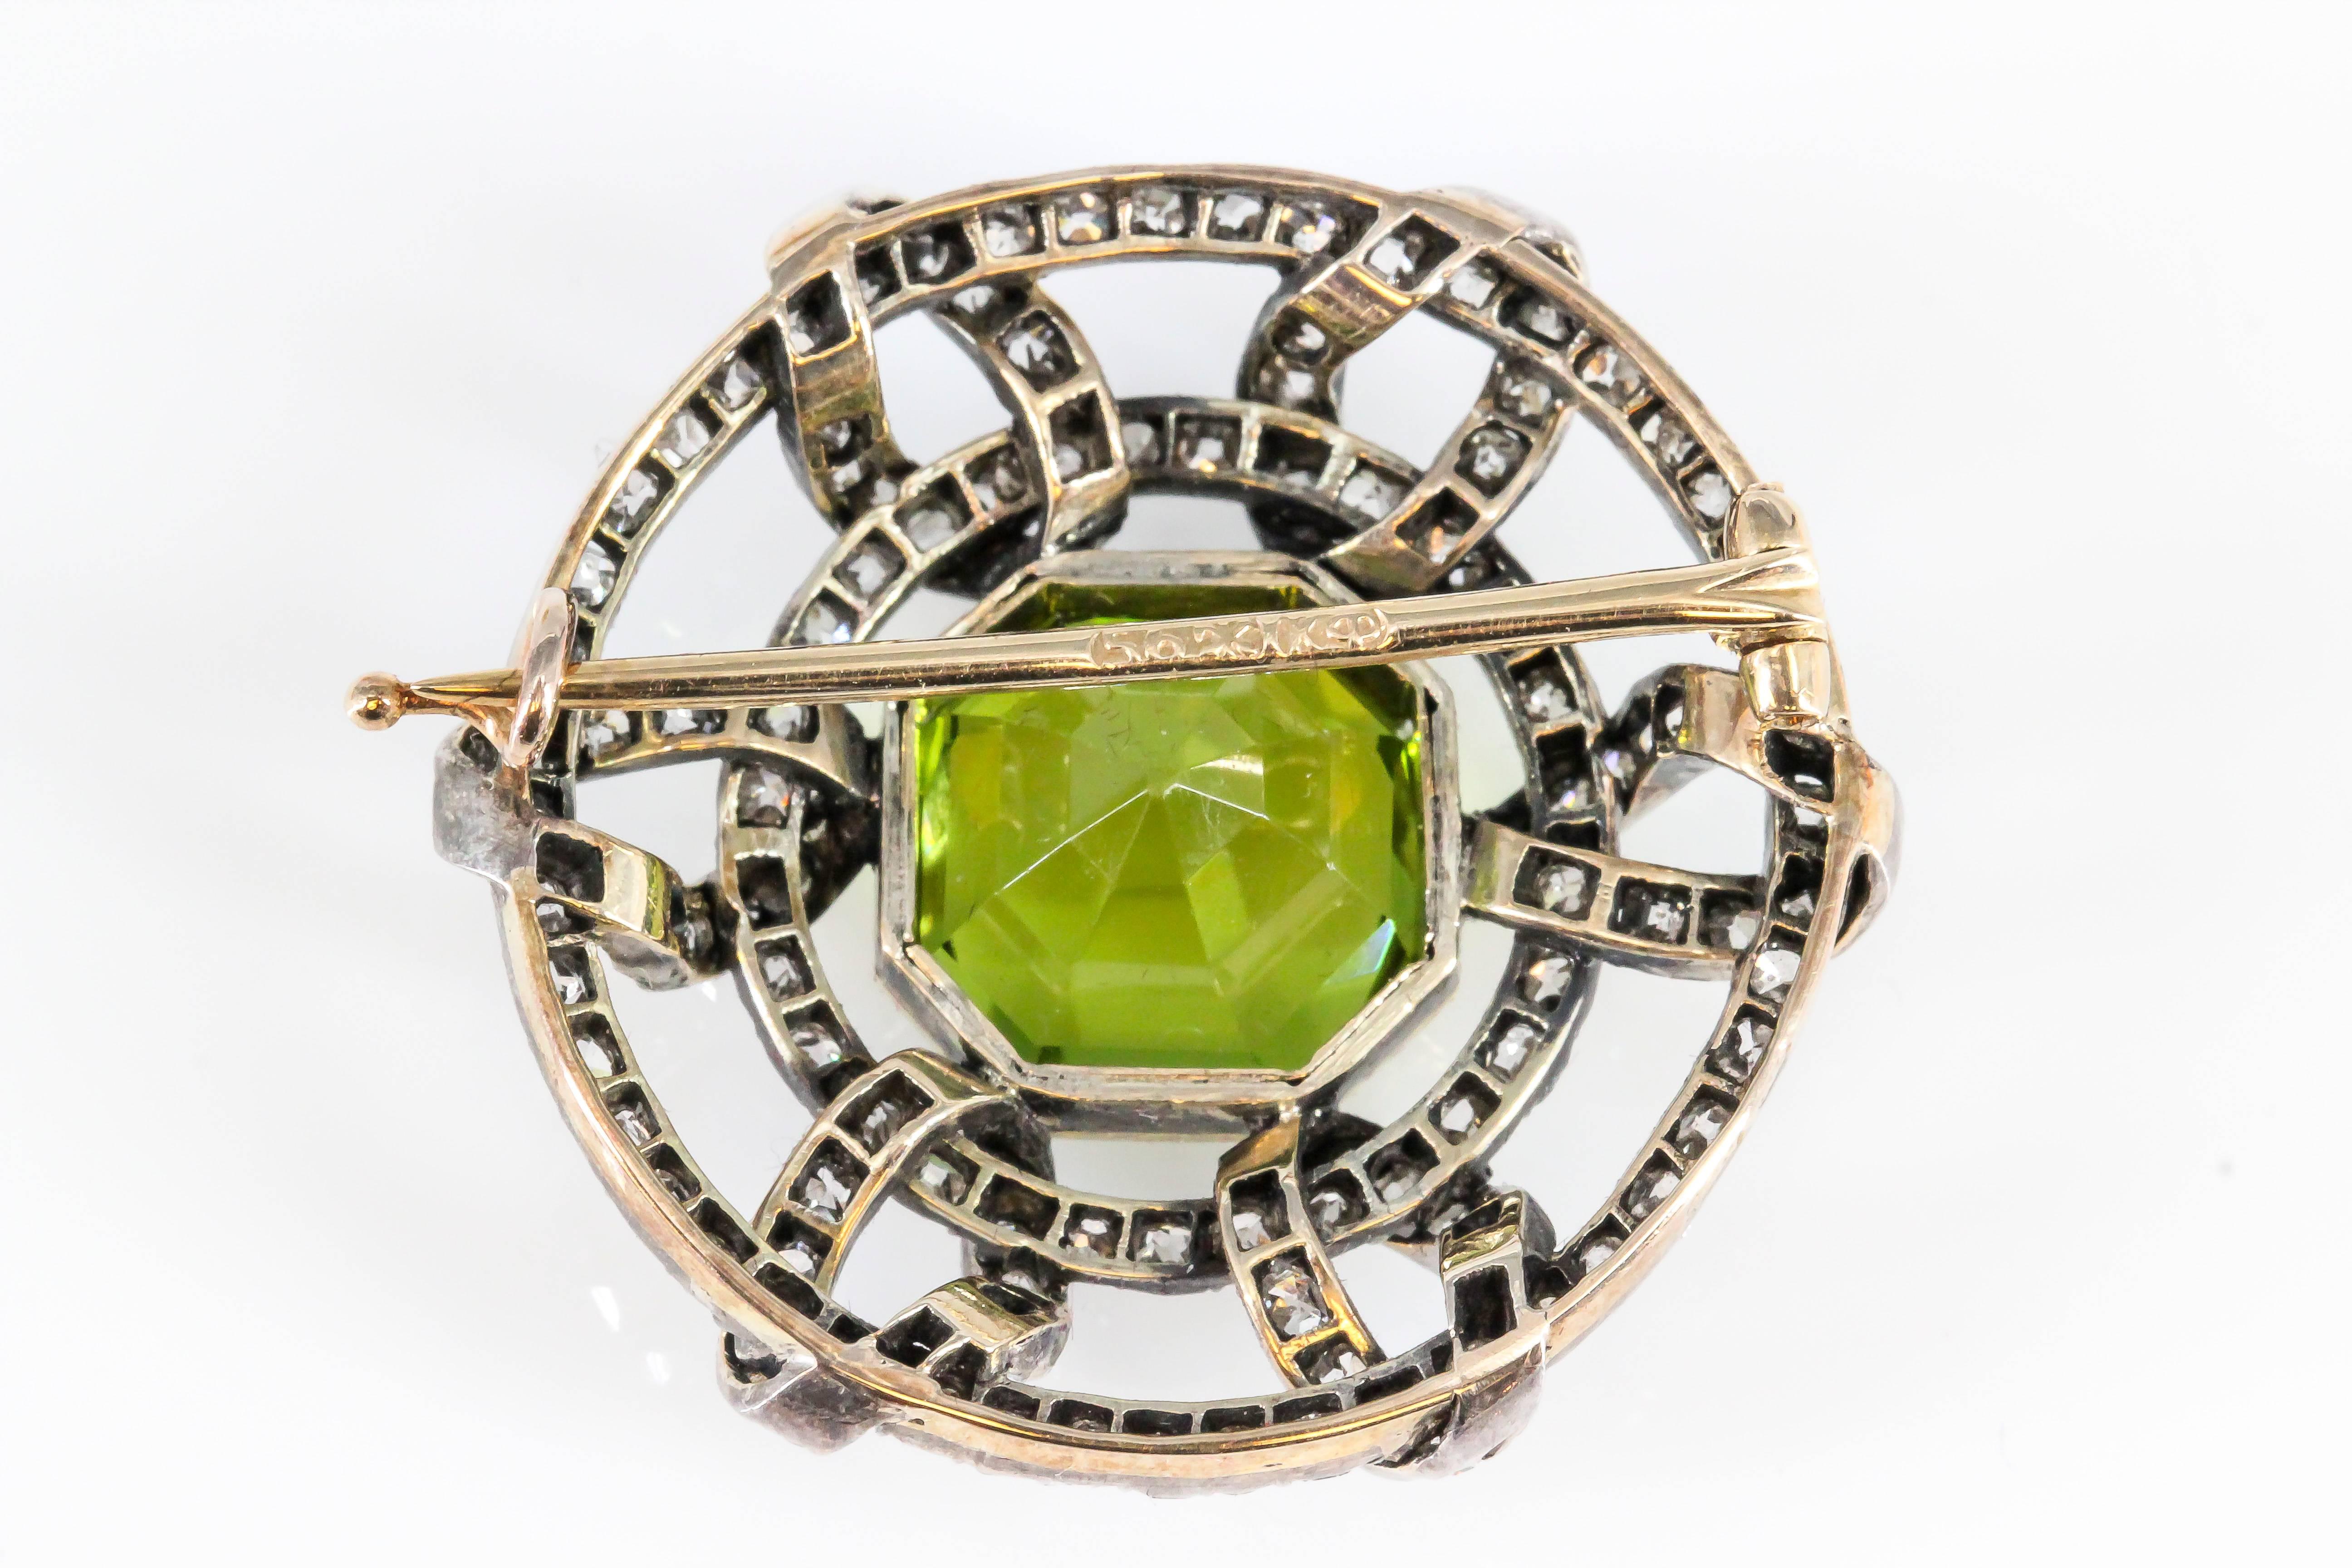 Rare and unusual peridot, diamond and 14K yellow gold brooch by Carl Faberge. The focal point is a richly colored peridot stone, approx. 19cts total weight, surrounded by high grade round brilliant cut diamonds over a 14K yellow gold